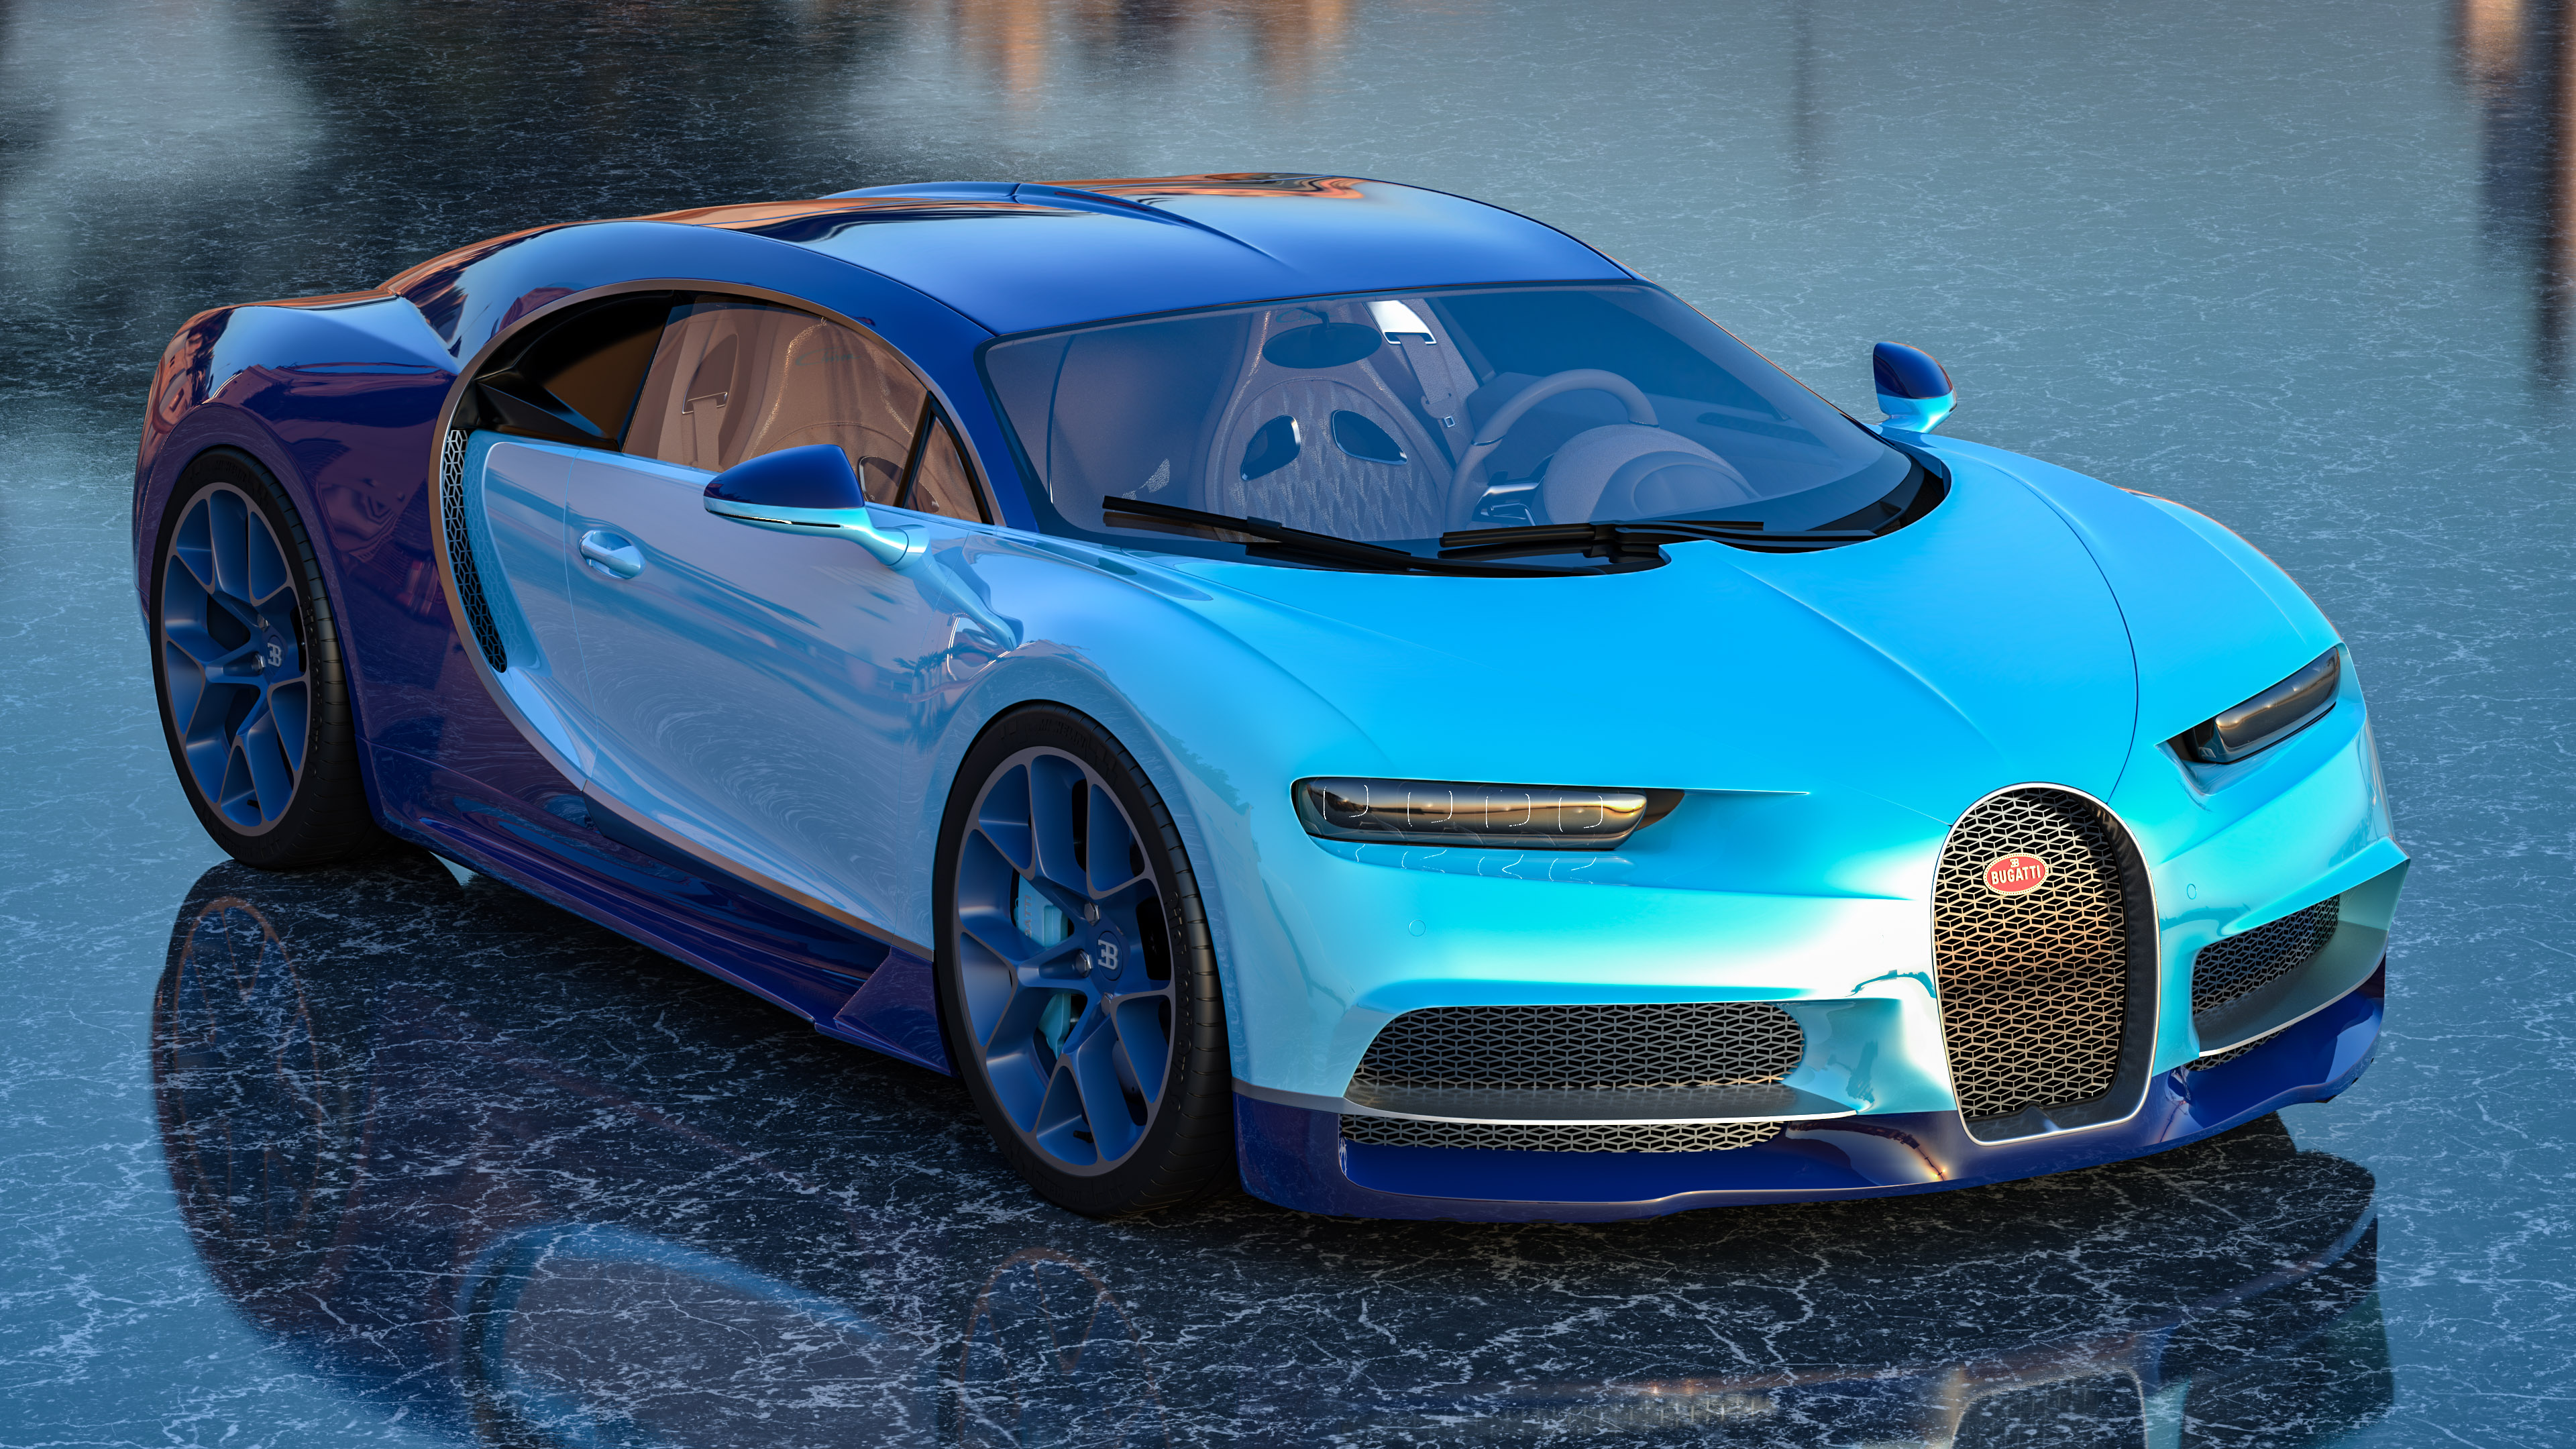 Our super car wallpaper collection wouldn’t be complete without the Bugatti Chiron, a masterpiece of engineering and design, ready to bring a touch of luxury to your screen.